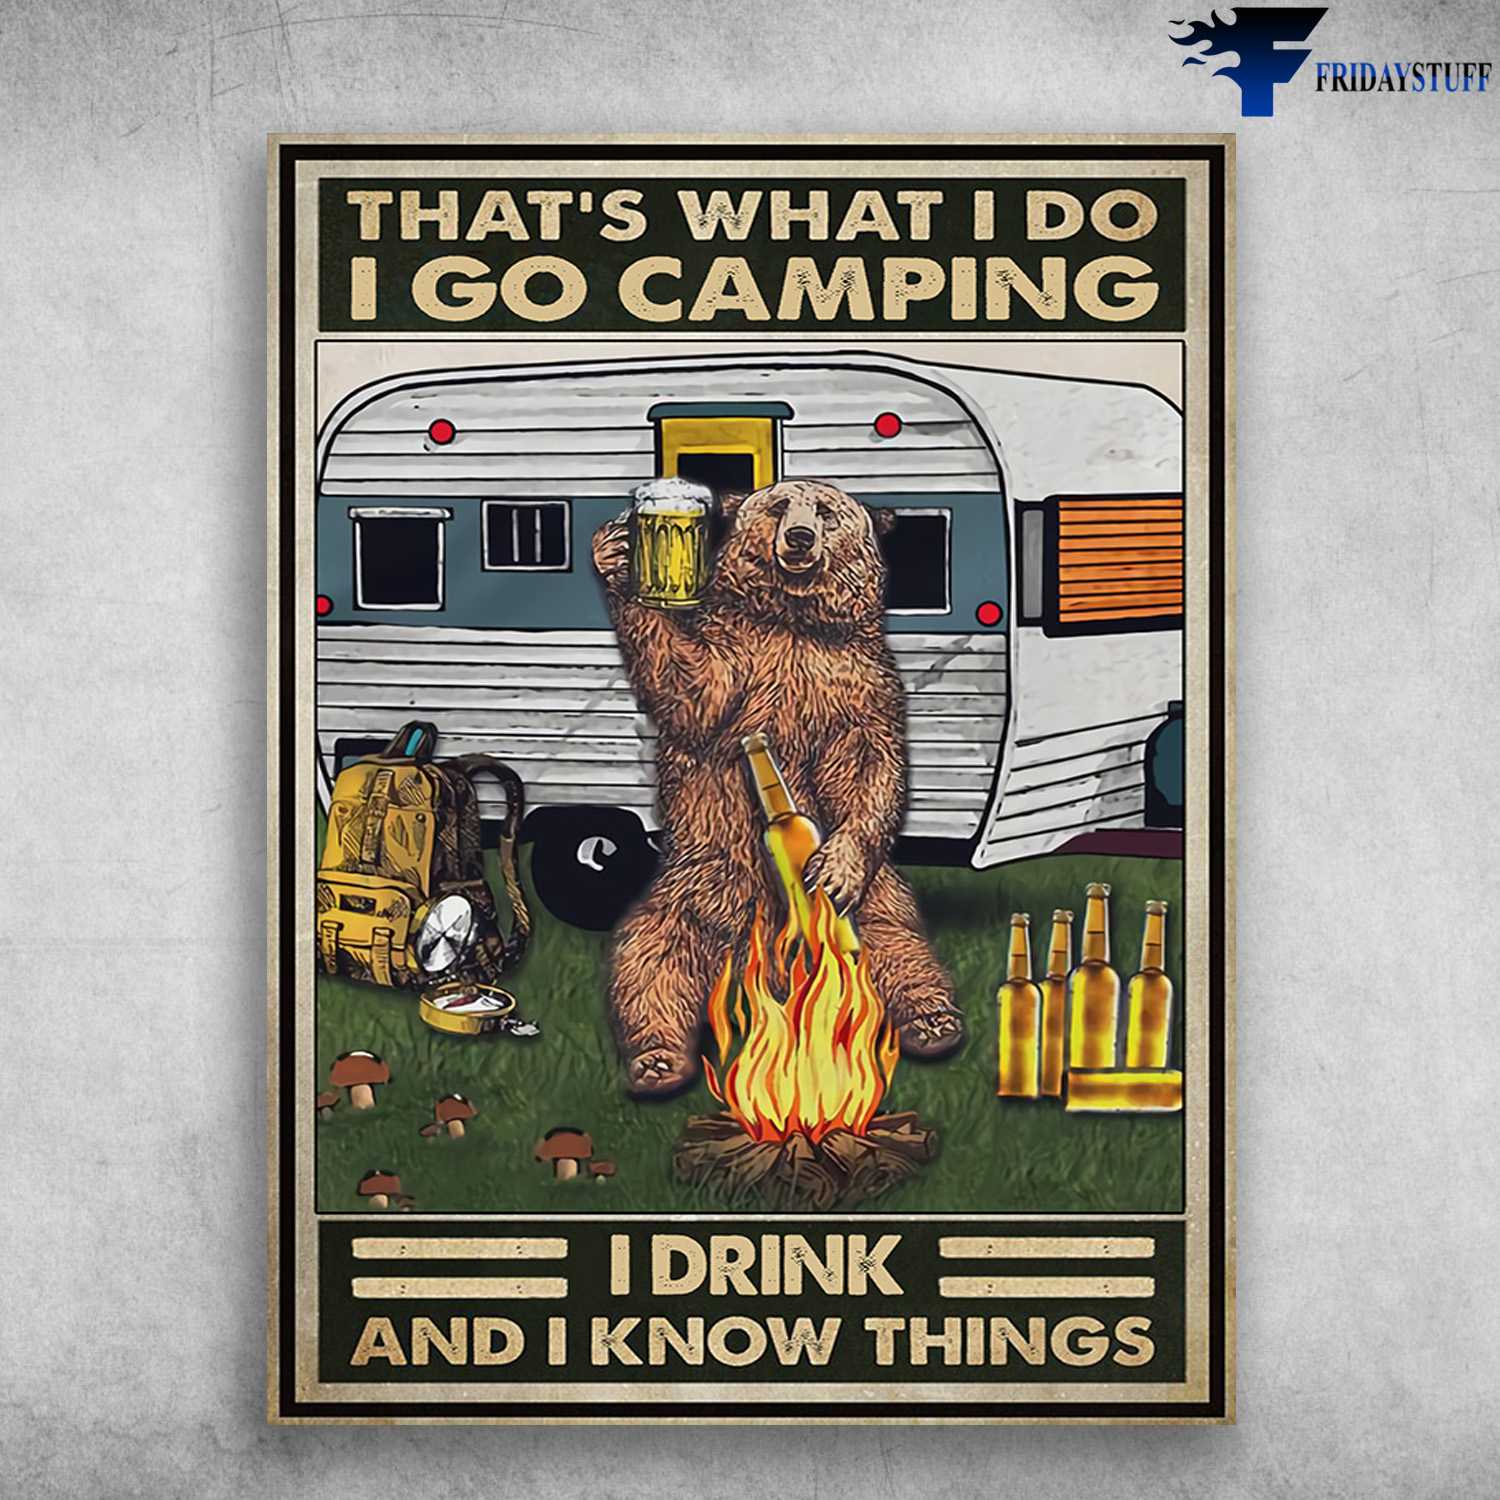 https://fridaystuff.com/wp-content/uploads/2021/11/Bear-Beer-Camping-Lover-Thats-What-I-Do-I-Go-Camping-I-Drink-And-I-Know-Things.jpg